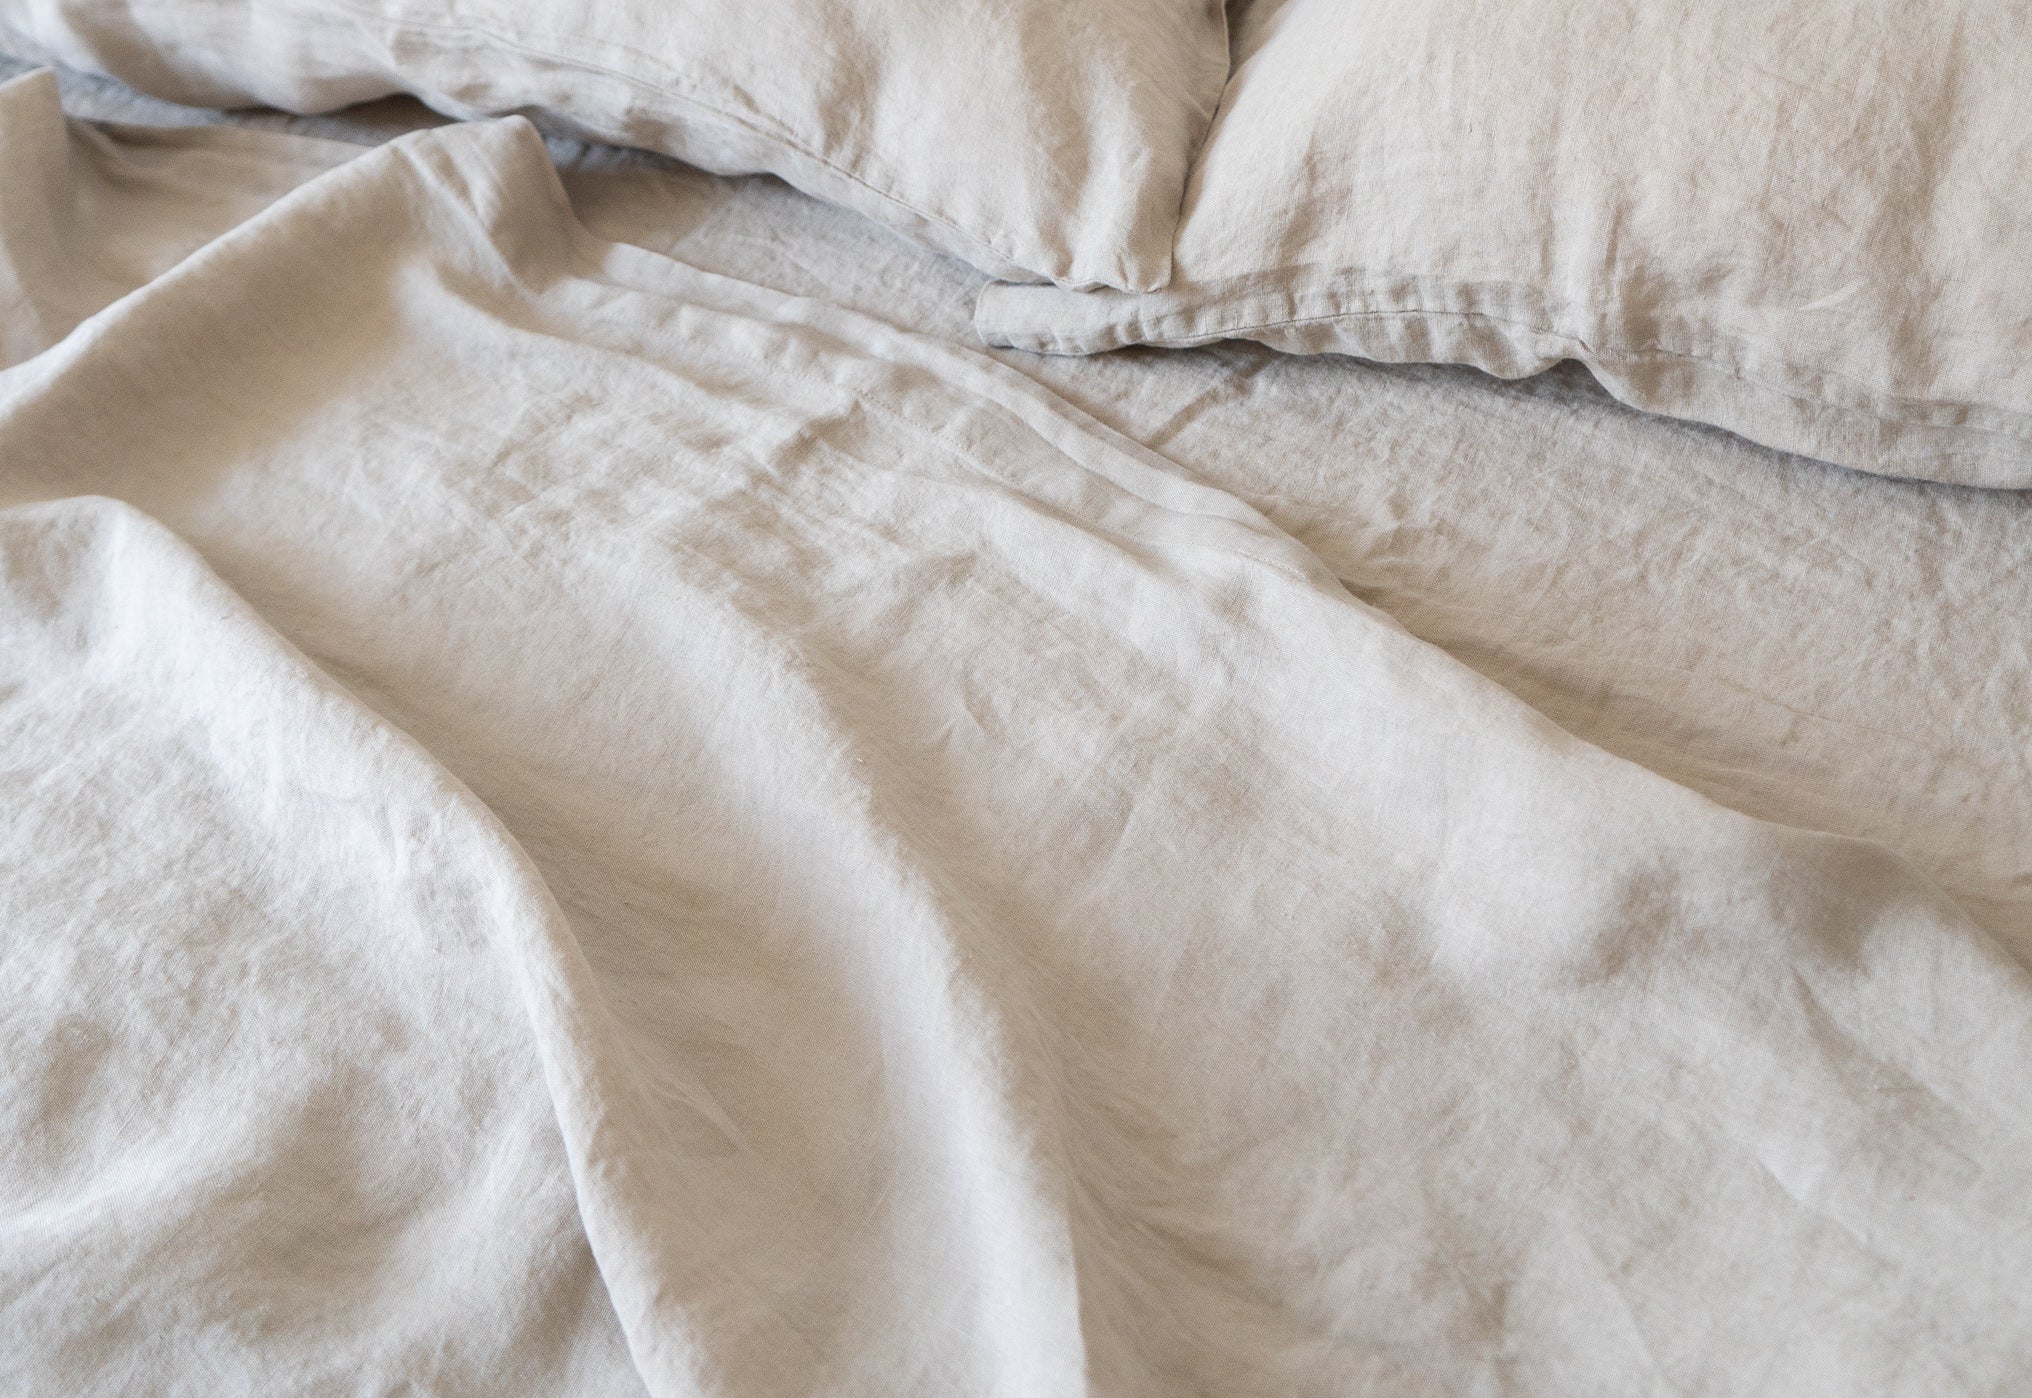 How to dry linen sheets